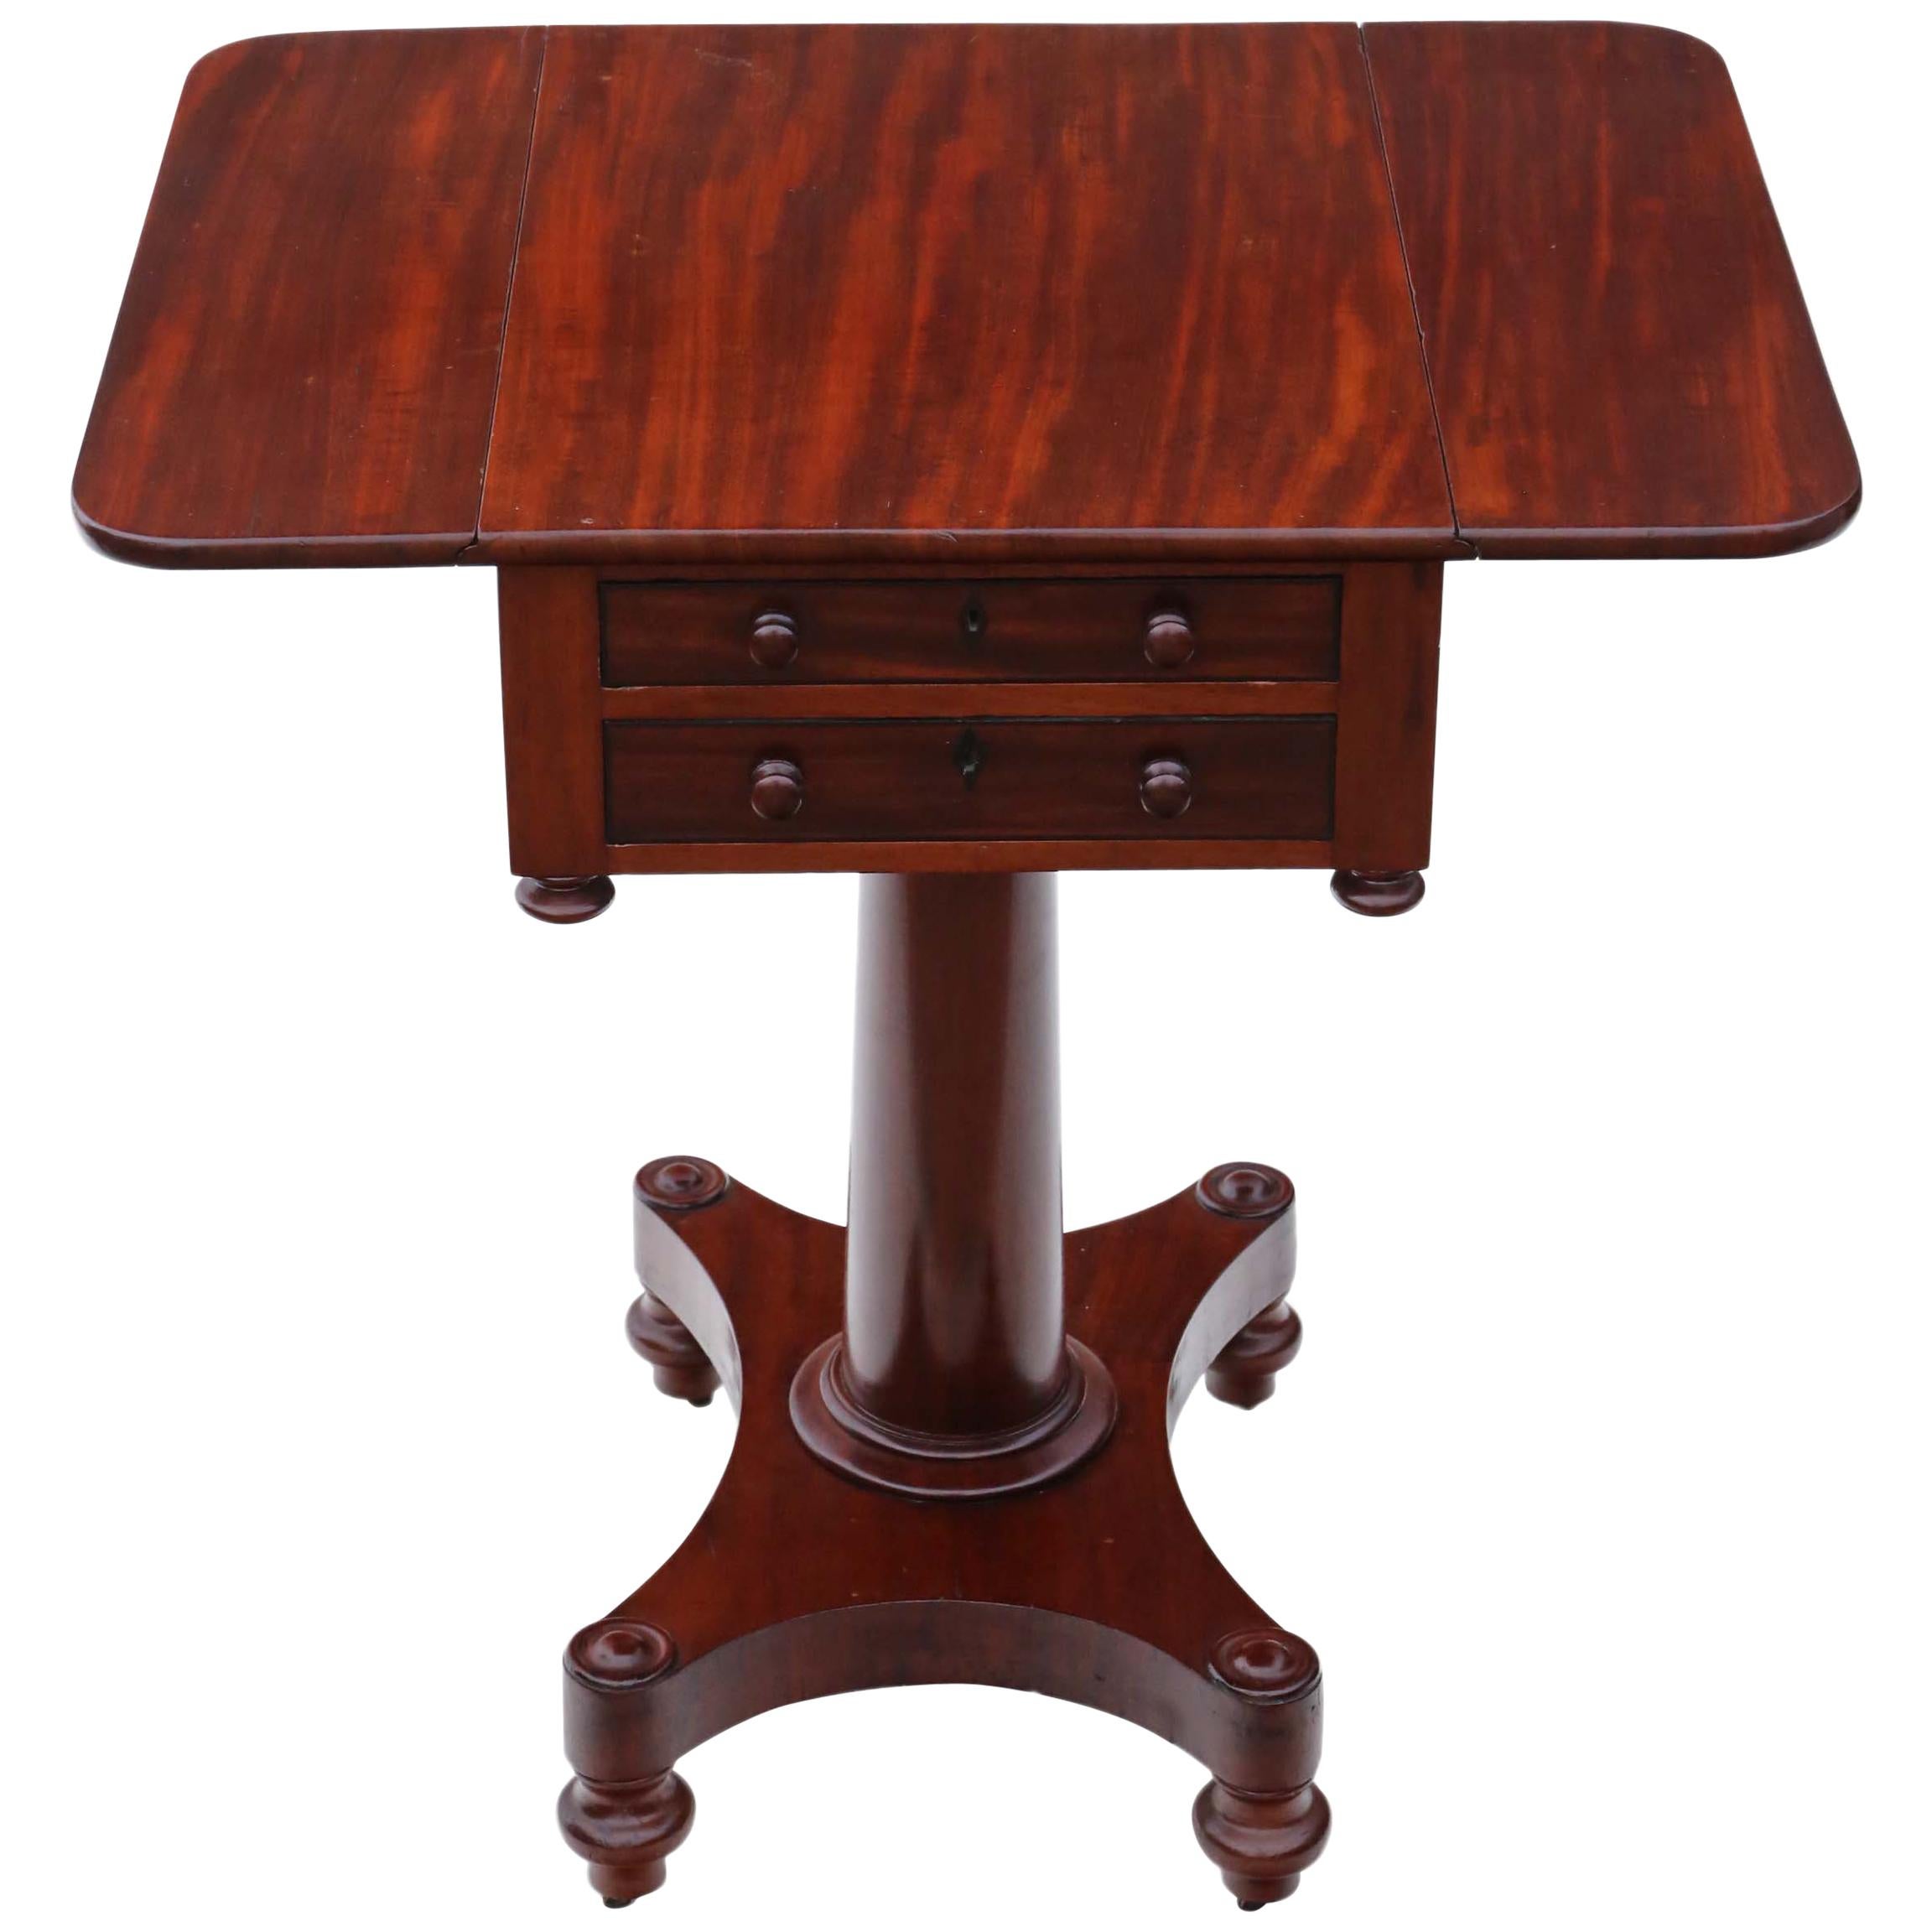 19th Century Two-Drawer Mahogany Drop Leaf Work Table